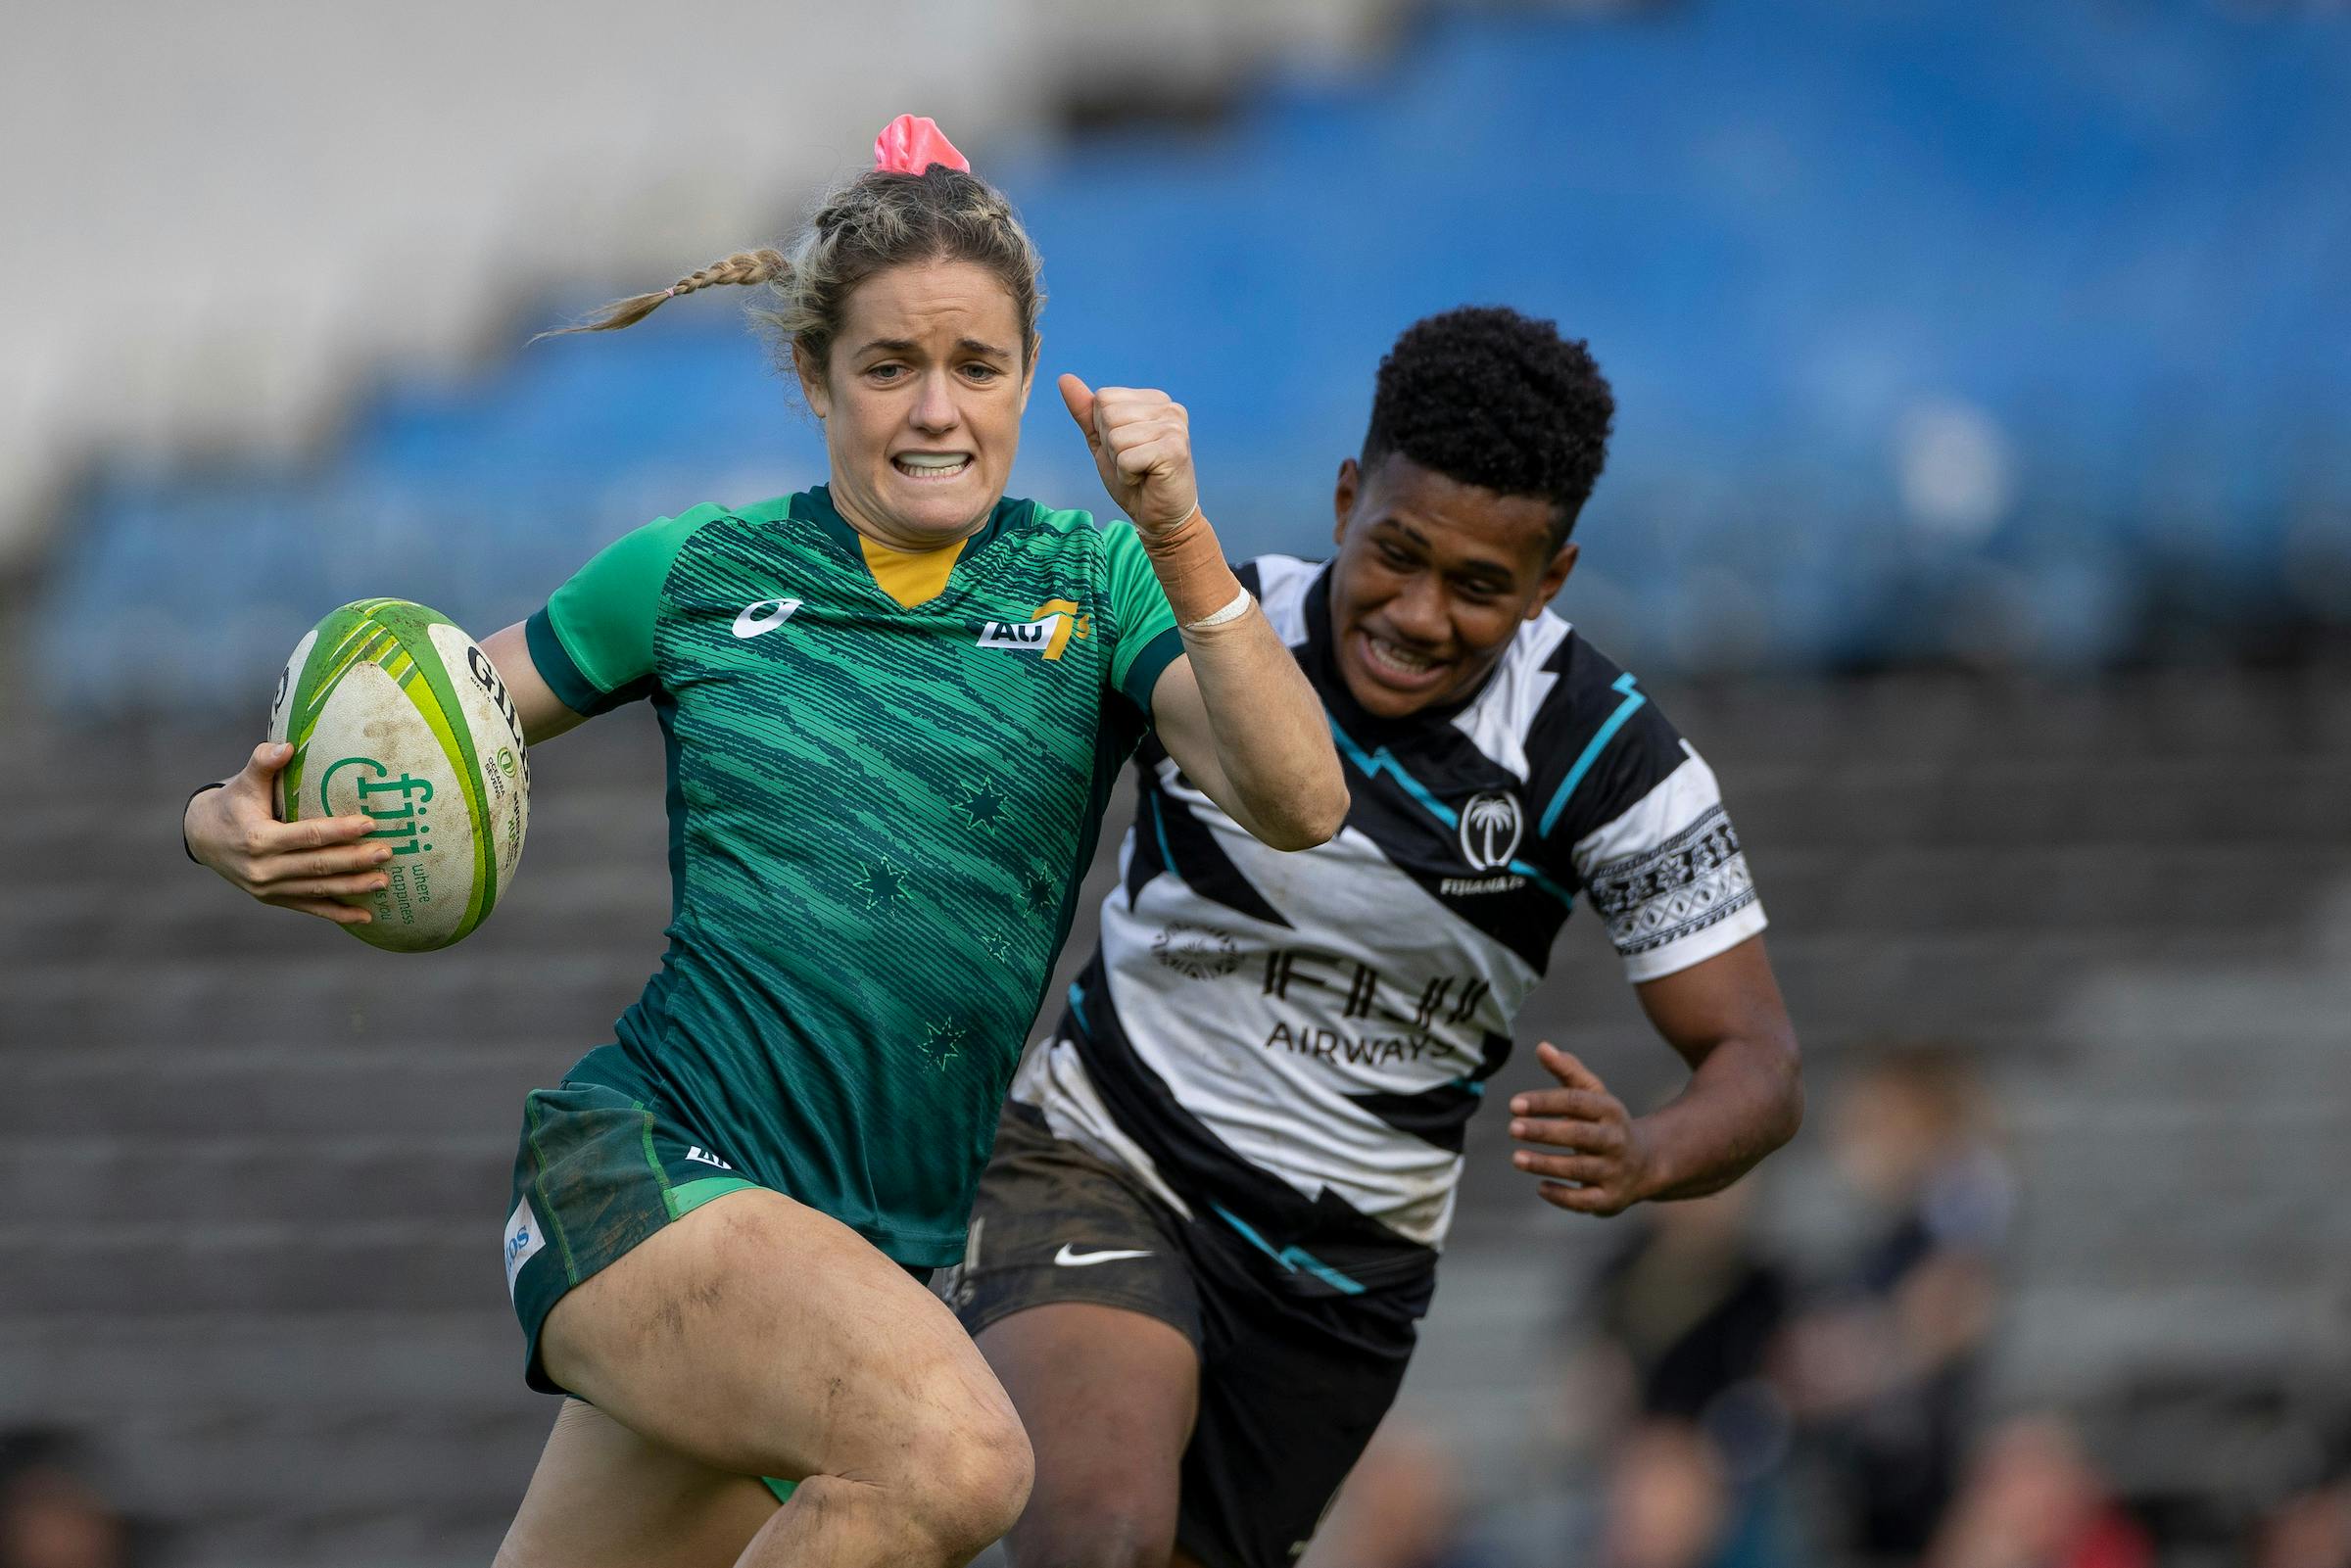 Lily Dick on the attack during the 2022 Oceania Super Sevens ahead of Birmingham 2022 Commonwealth Games 